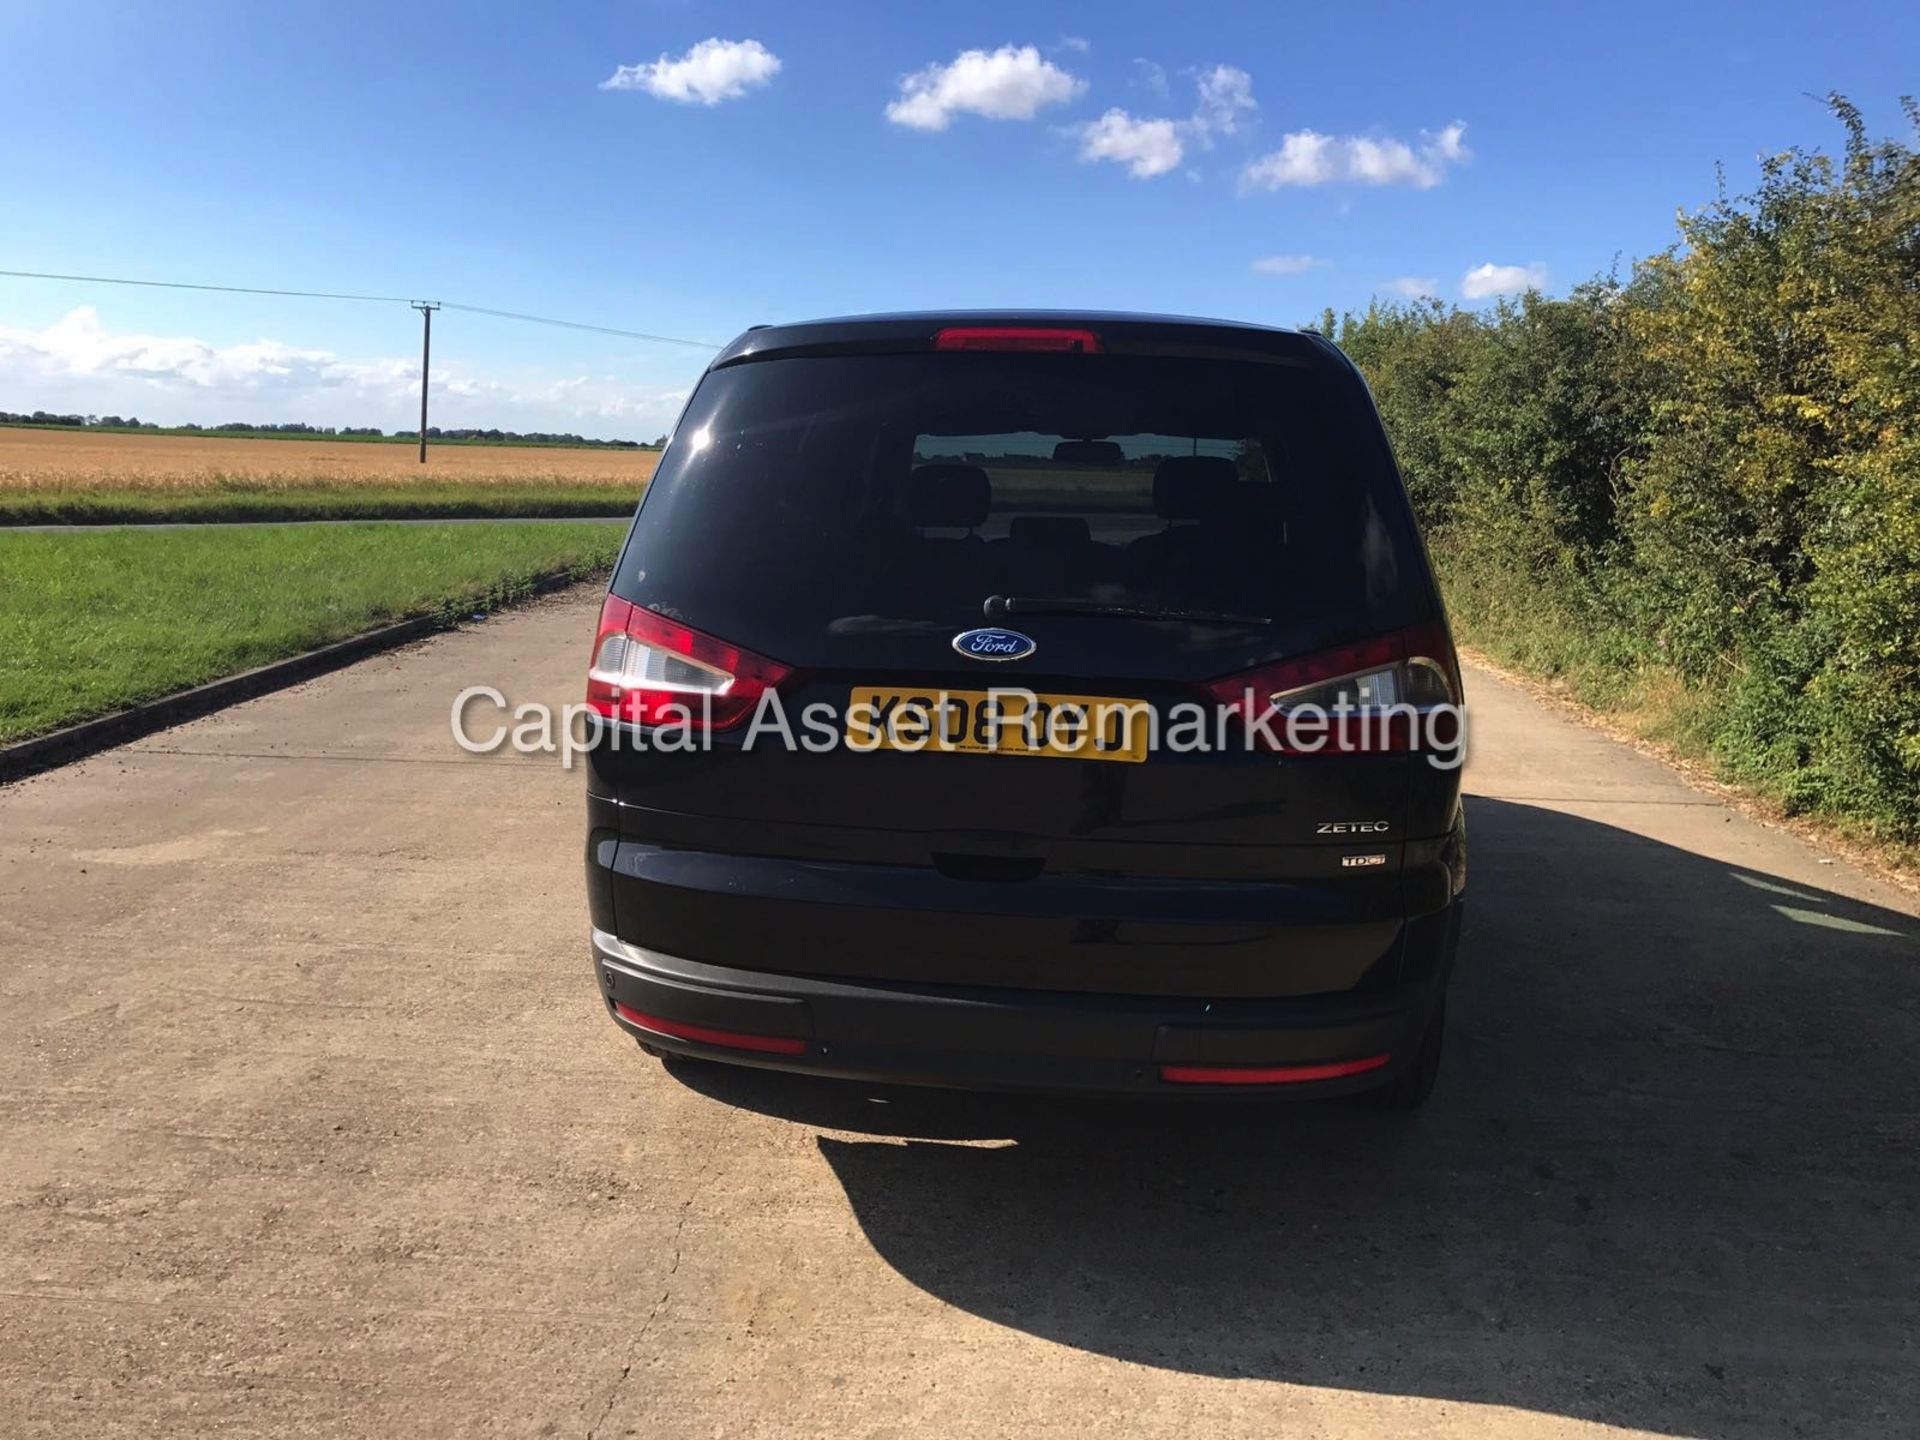 (ON SALE) FORD GALAXY 1.8TDCI ZETEC "125BHP-6 SPEED" 7 SEATER MPV -MASSIVE SPEC -CLIMATE -AIR CON - Image 4 of 14